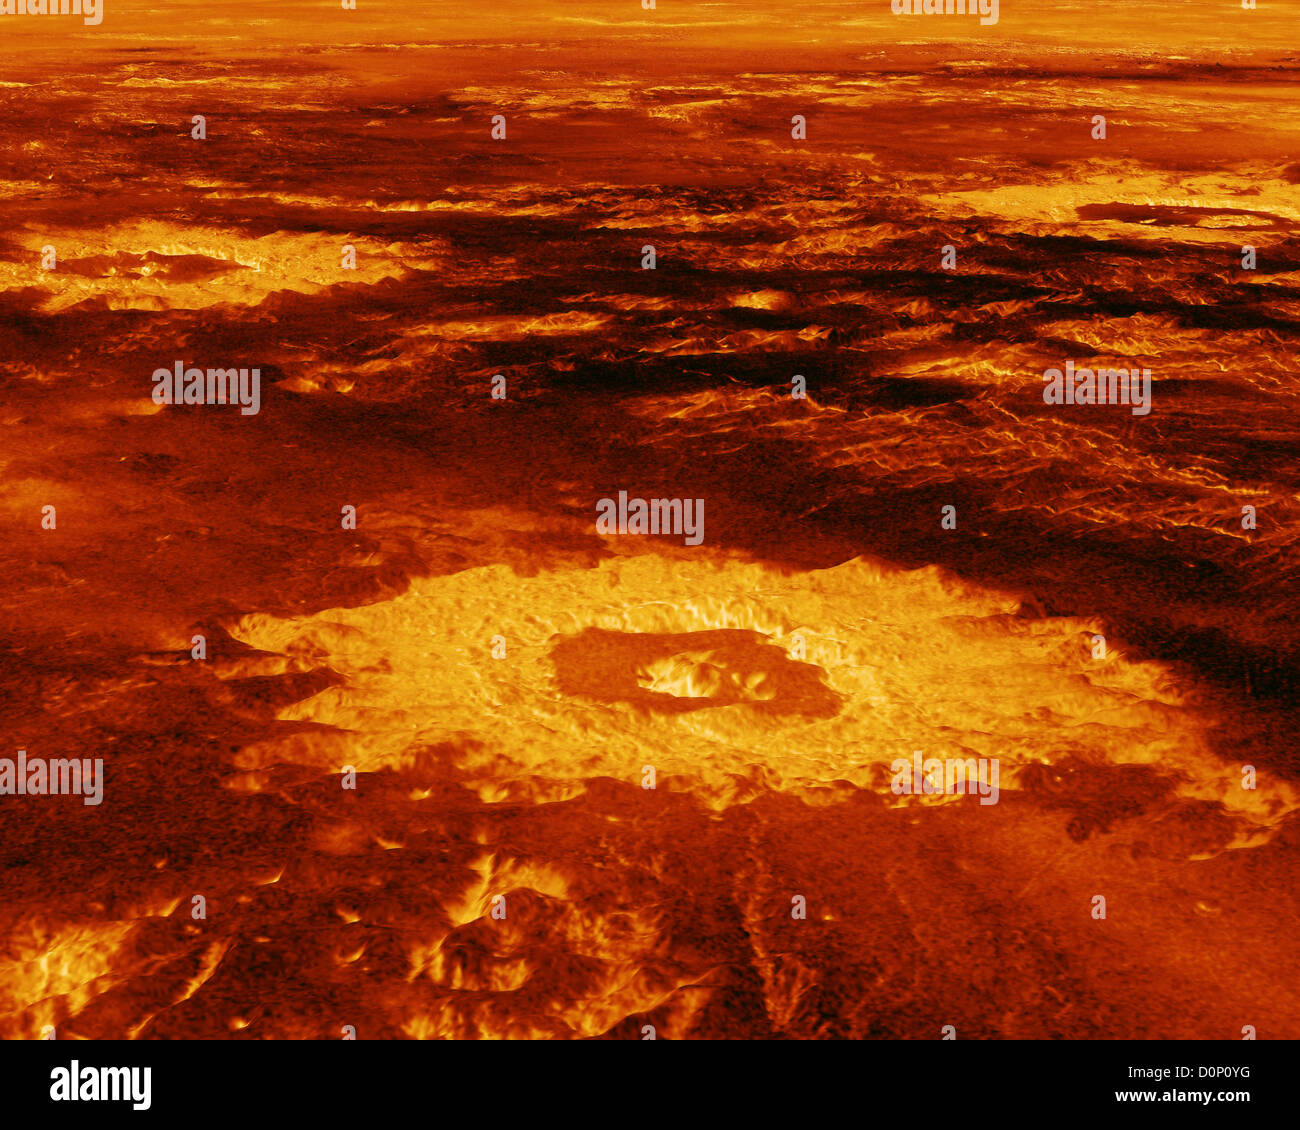 Three-Dimensional Perspective View of Lavinia Planitia on Venus by Magellan (Digitally Generated) Stock Photo